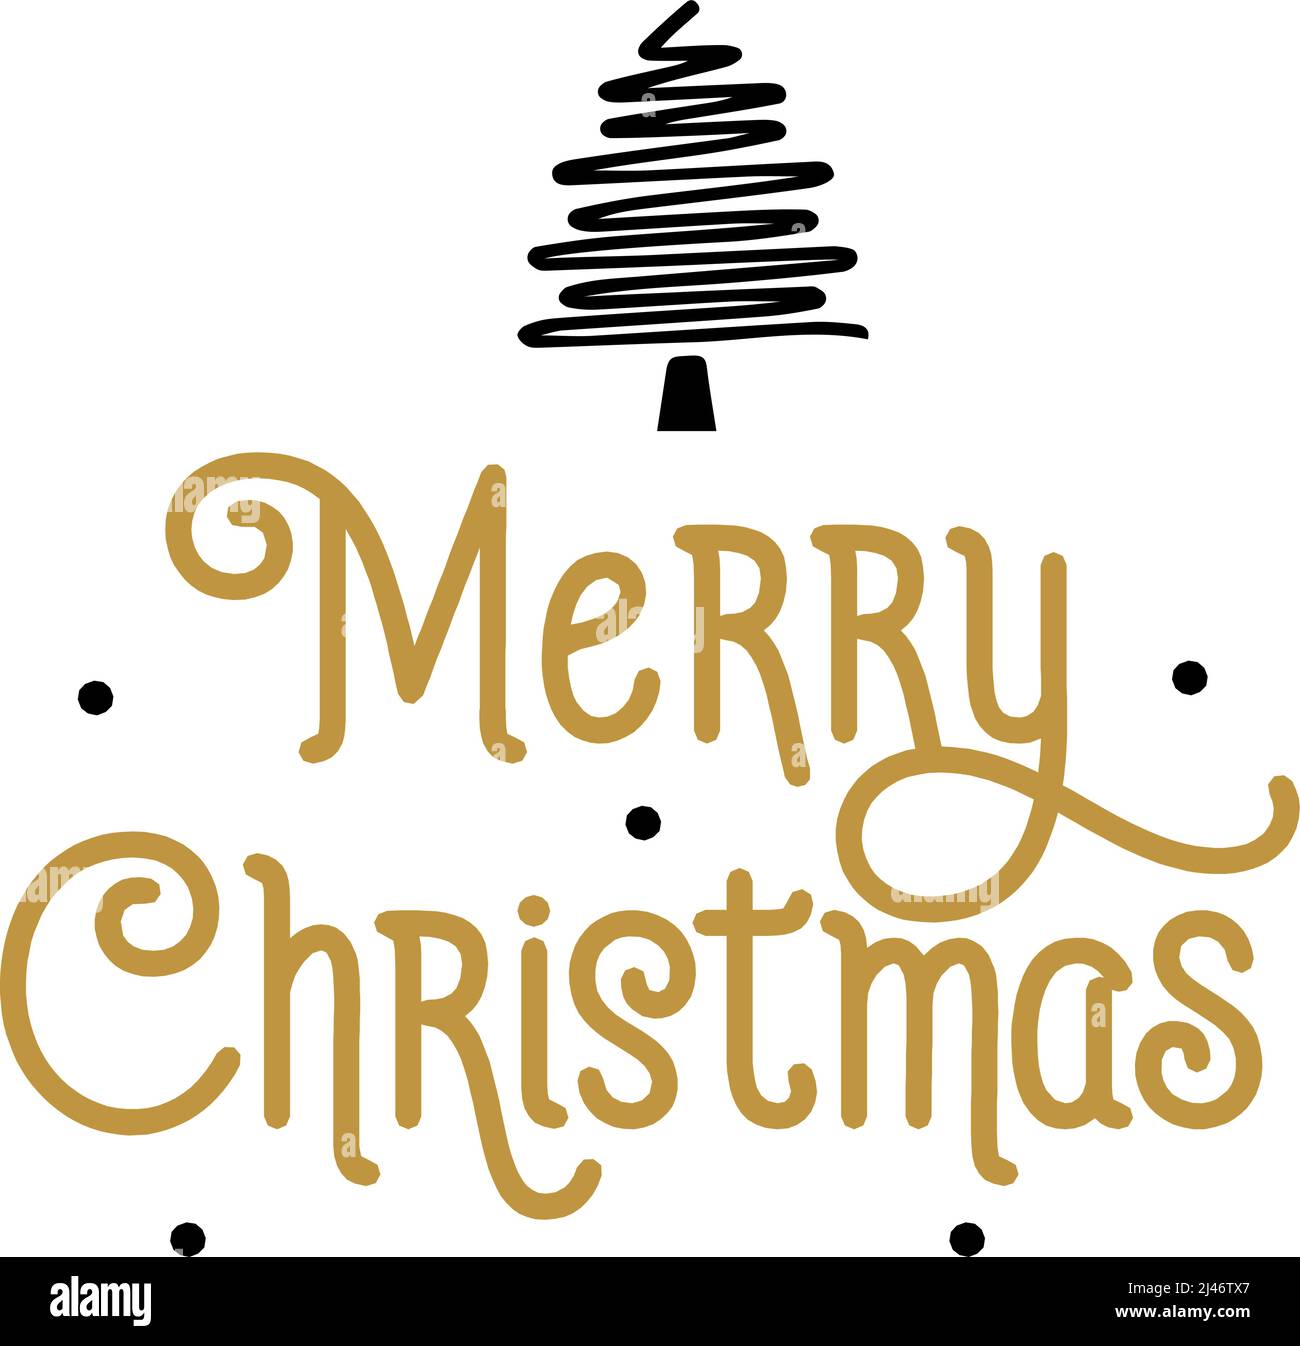 Merry Christmas lettering. Calligraphic inscription with fir tree and black dots. Handwritten text, calligraphy. Can be used for greeting cards, poste Stock Vector